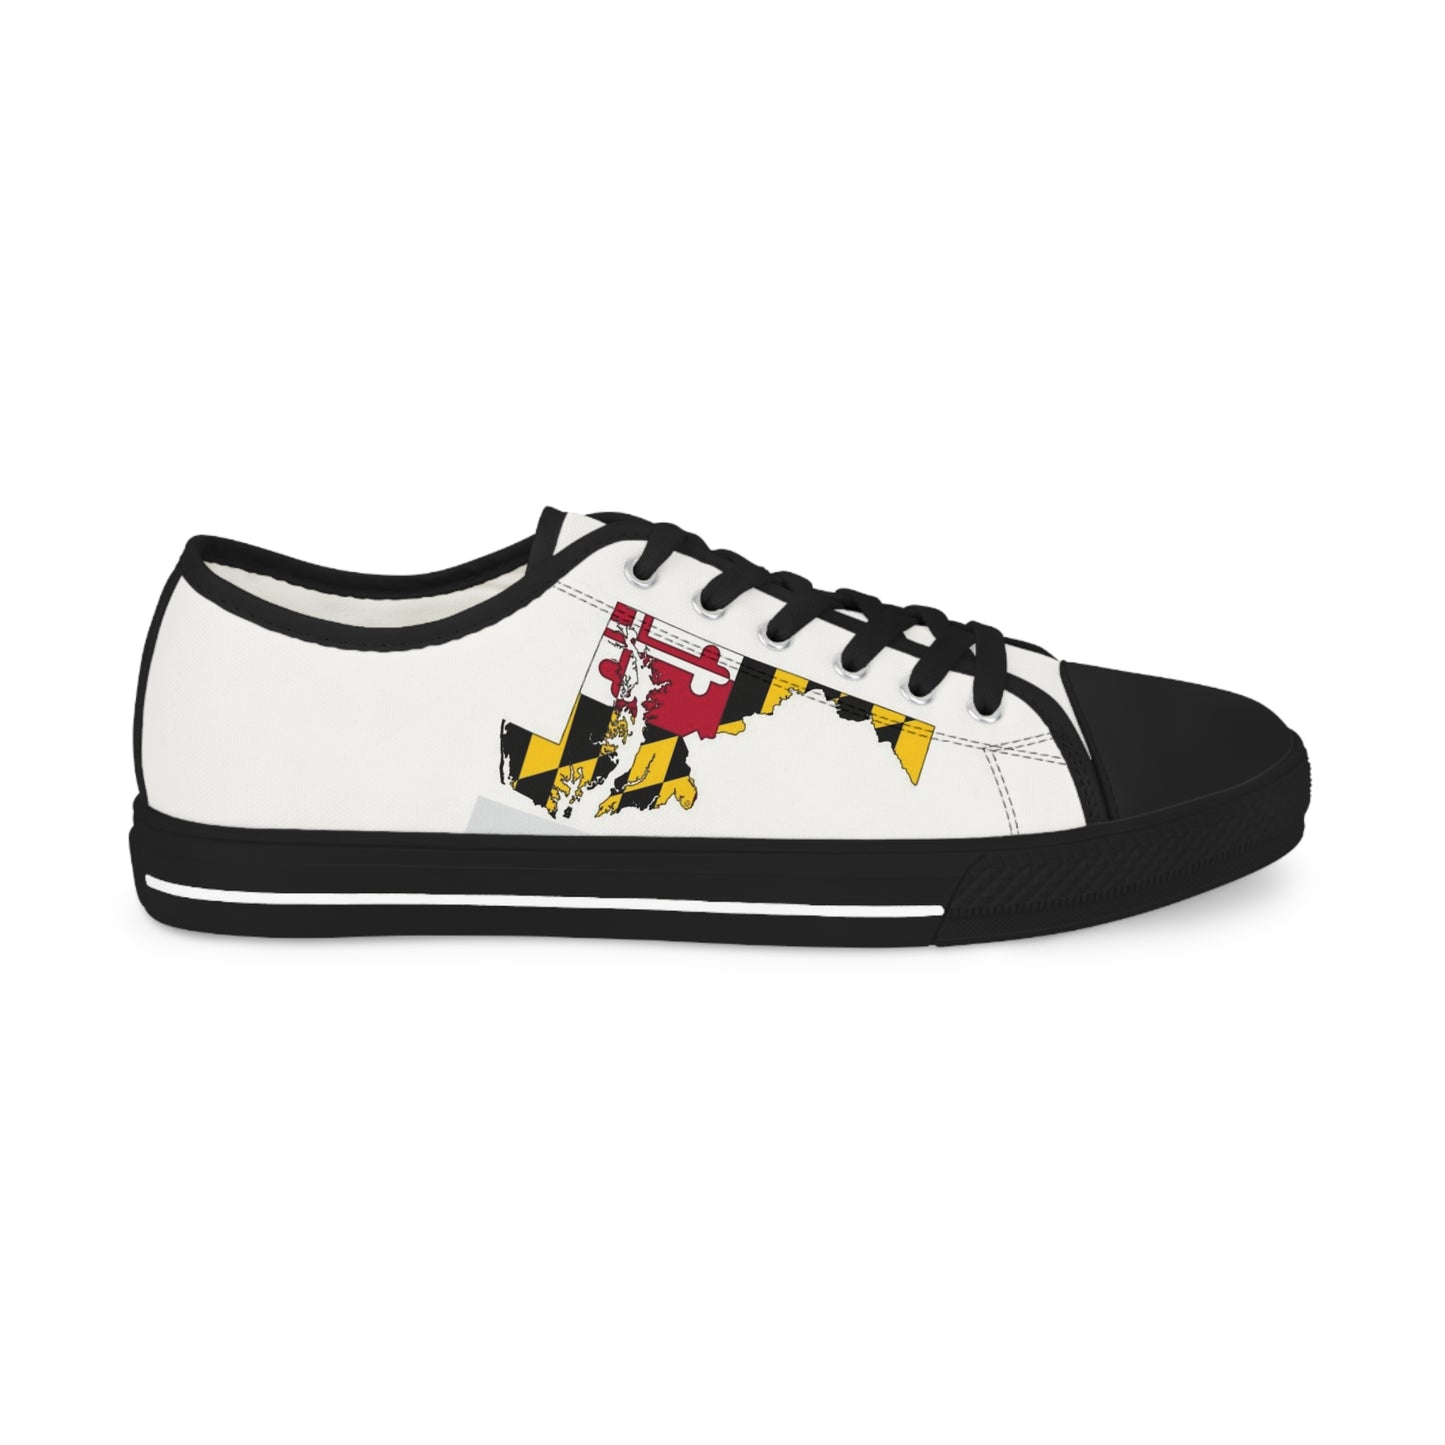 Maryland Men's Low Top Sneakers Black/White